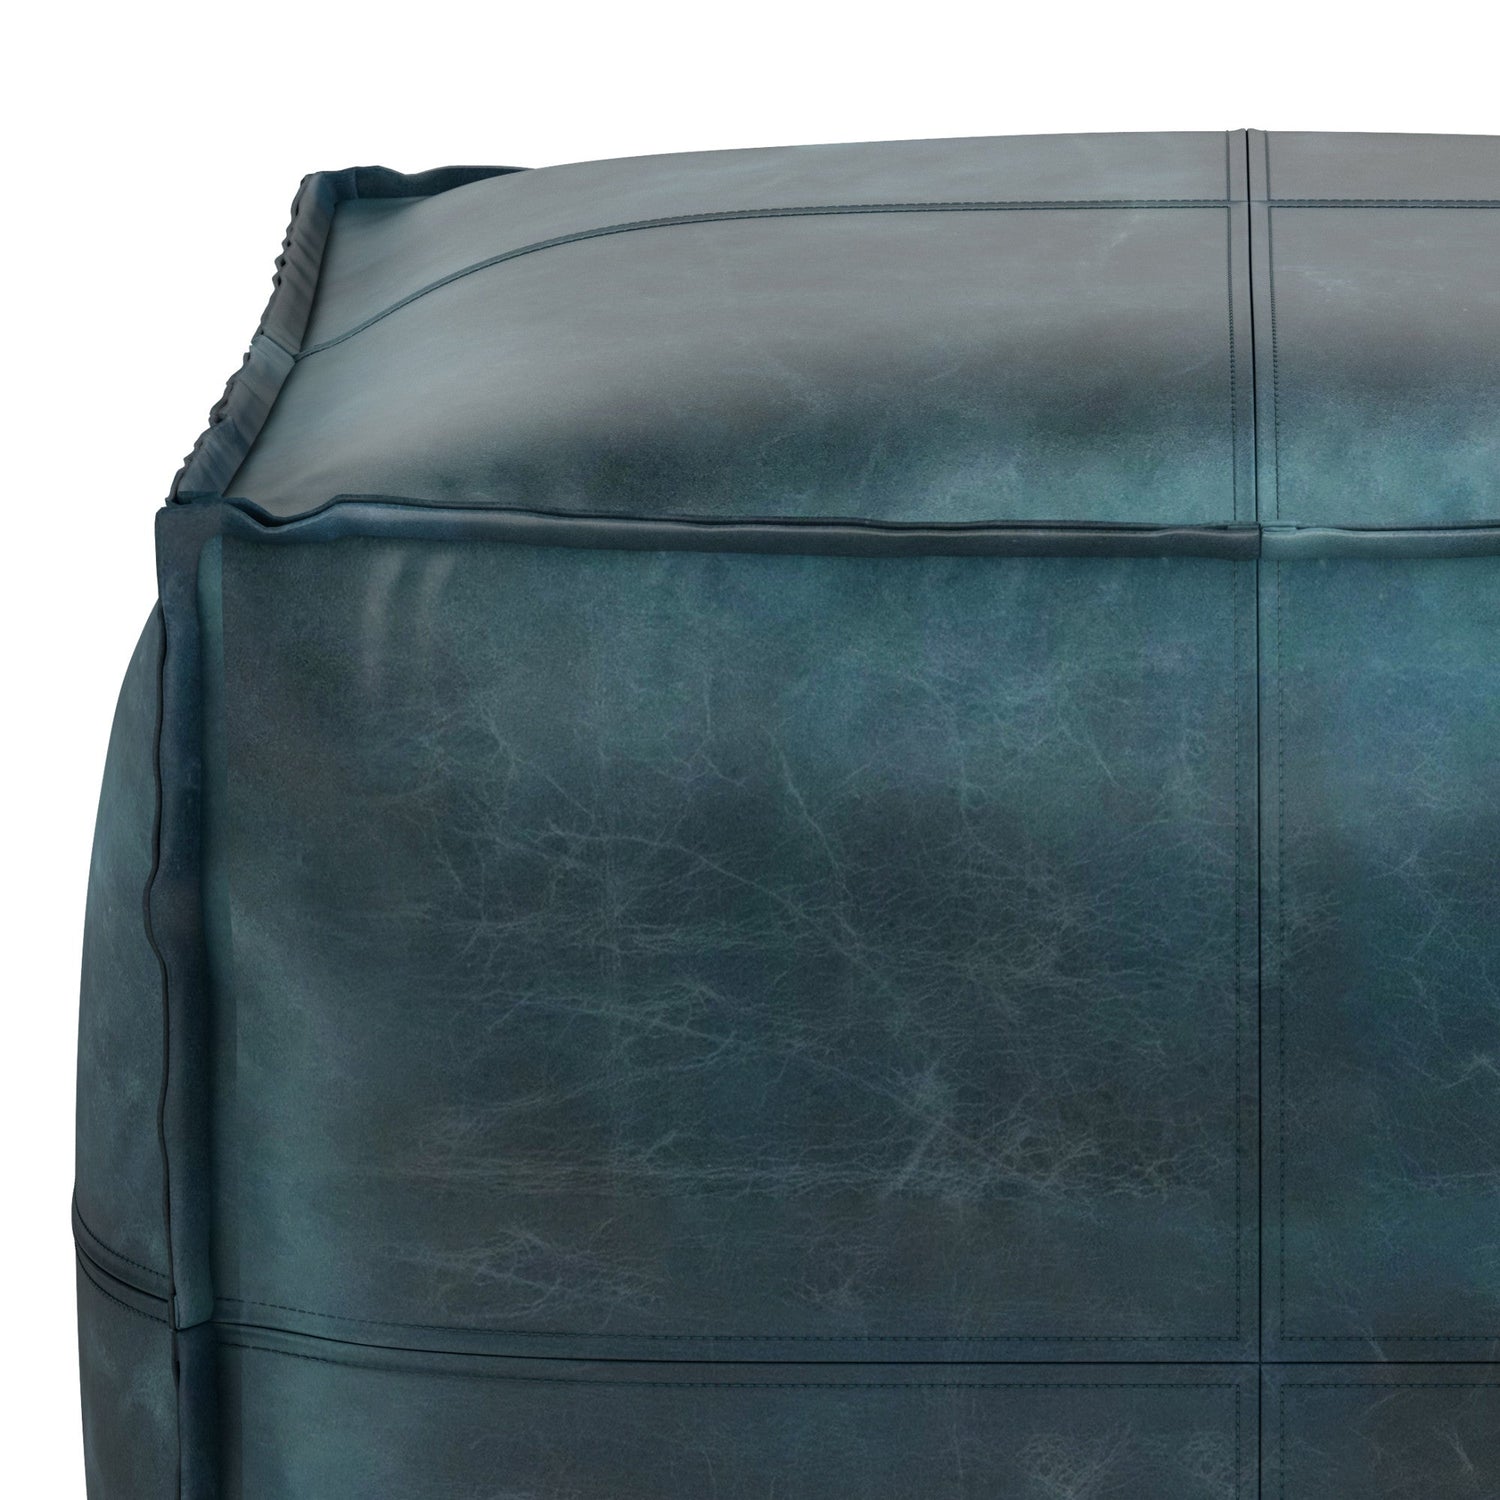 Distressed Teal Blue | Sheffield Square Pouf